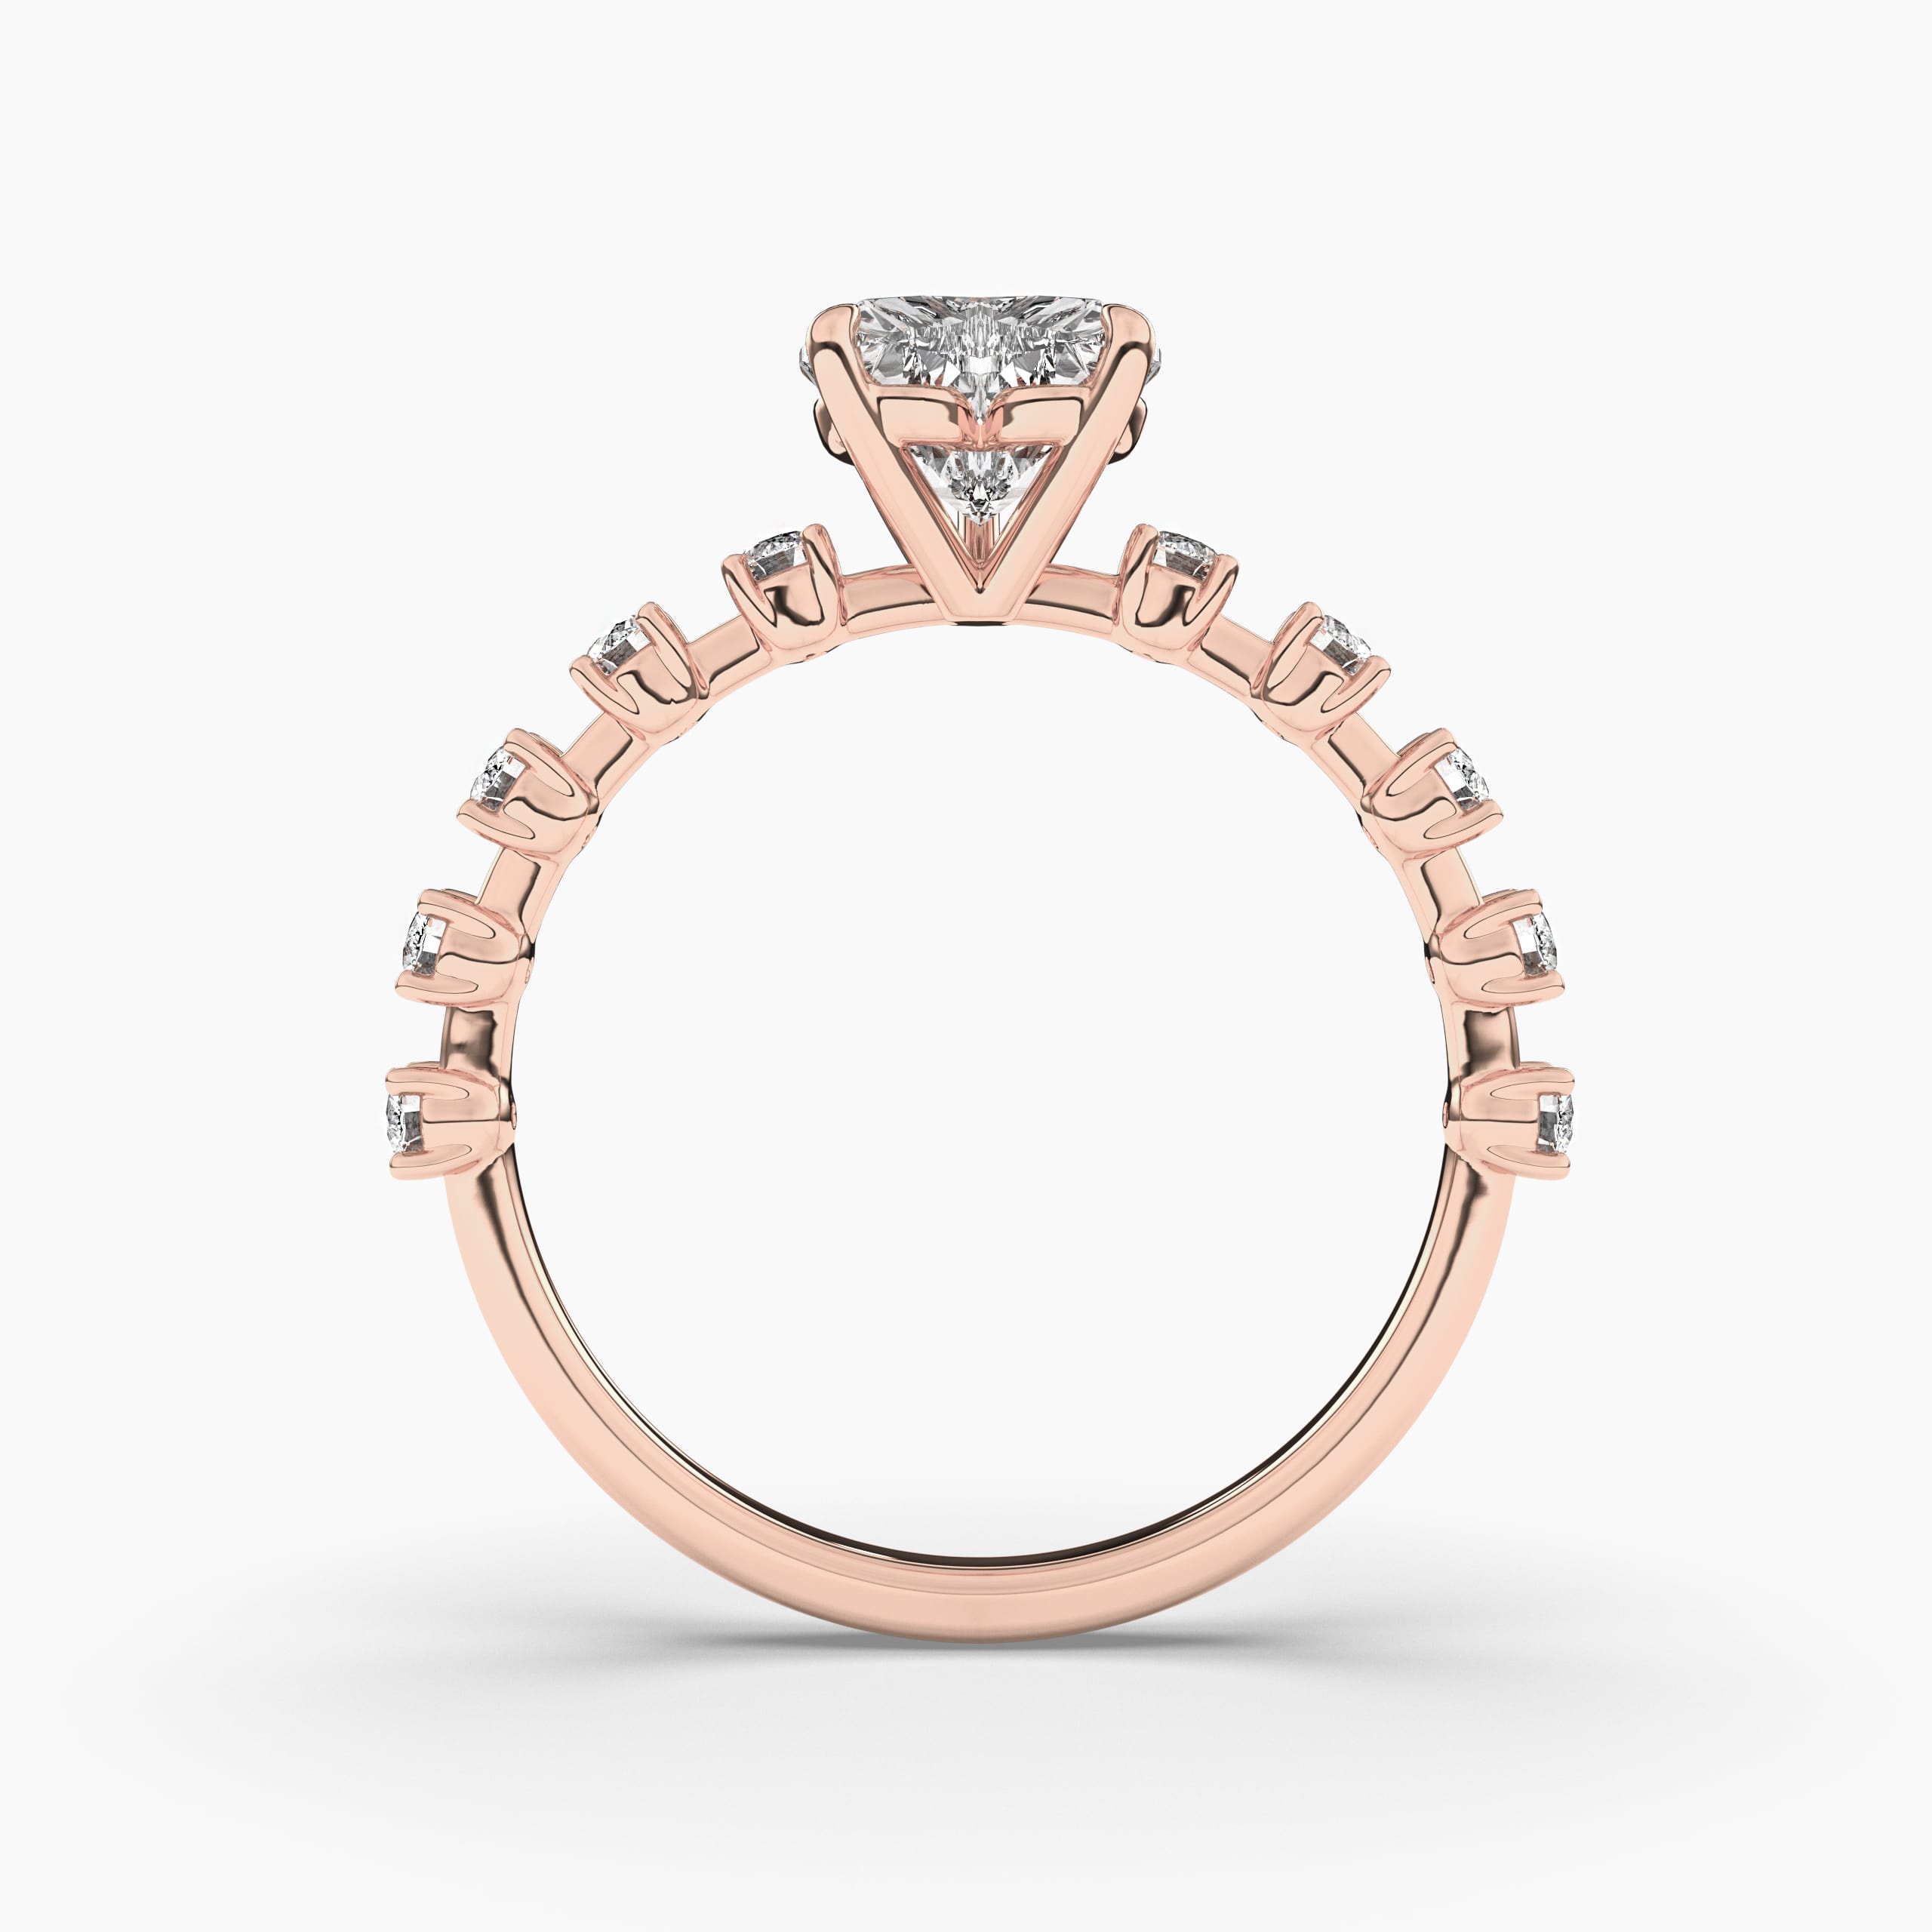 Heart shaped Ruby engagement ring rose gold ring